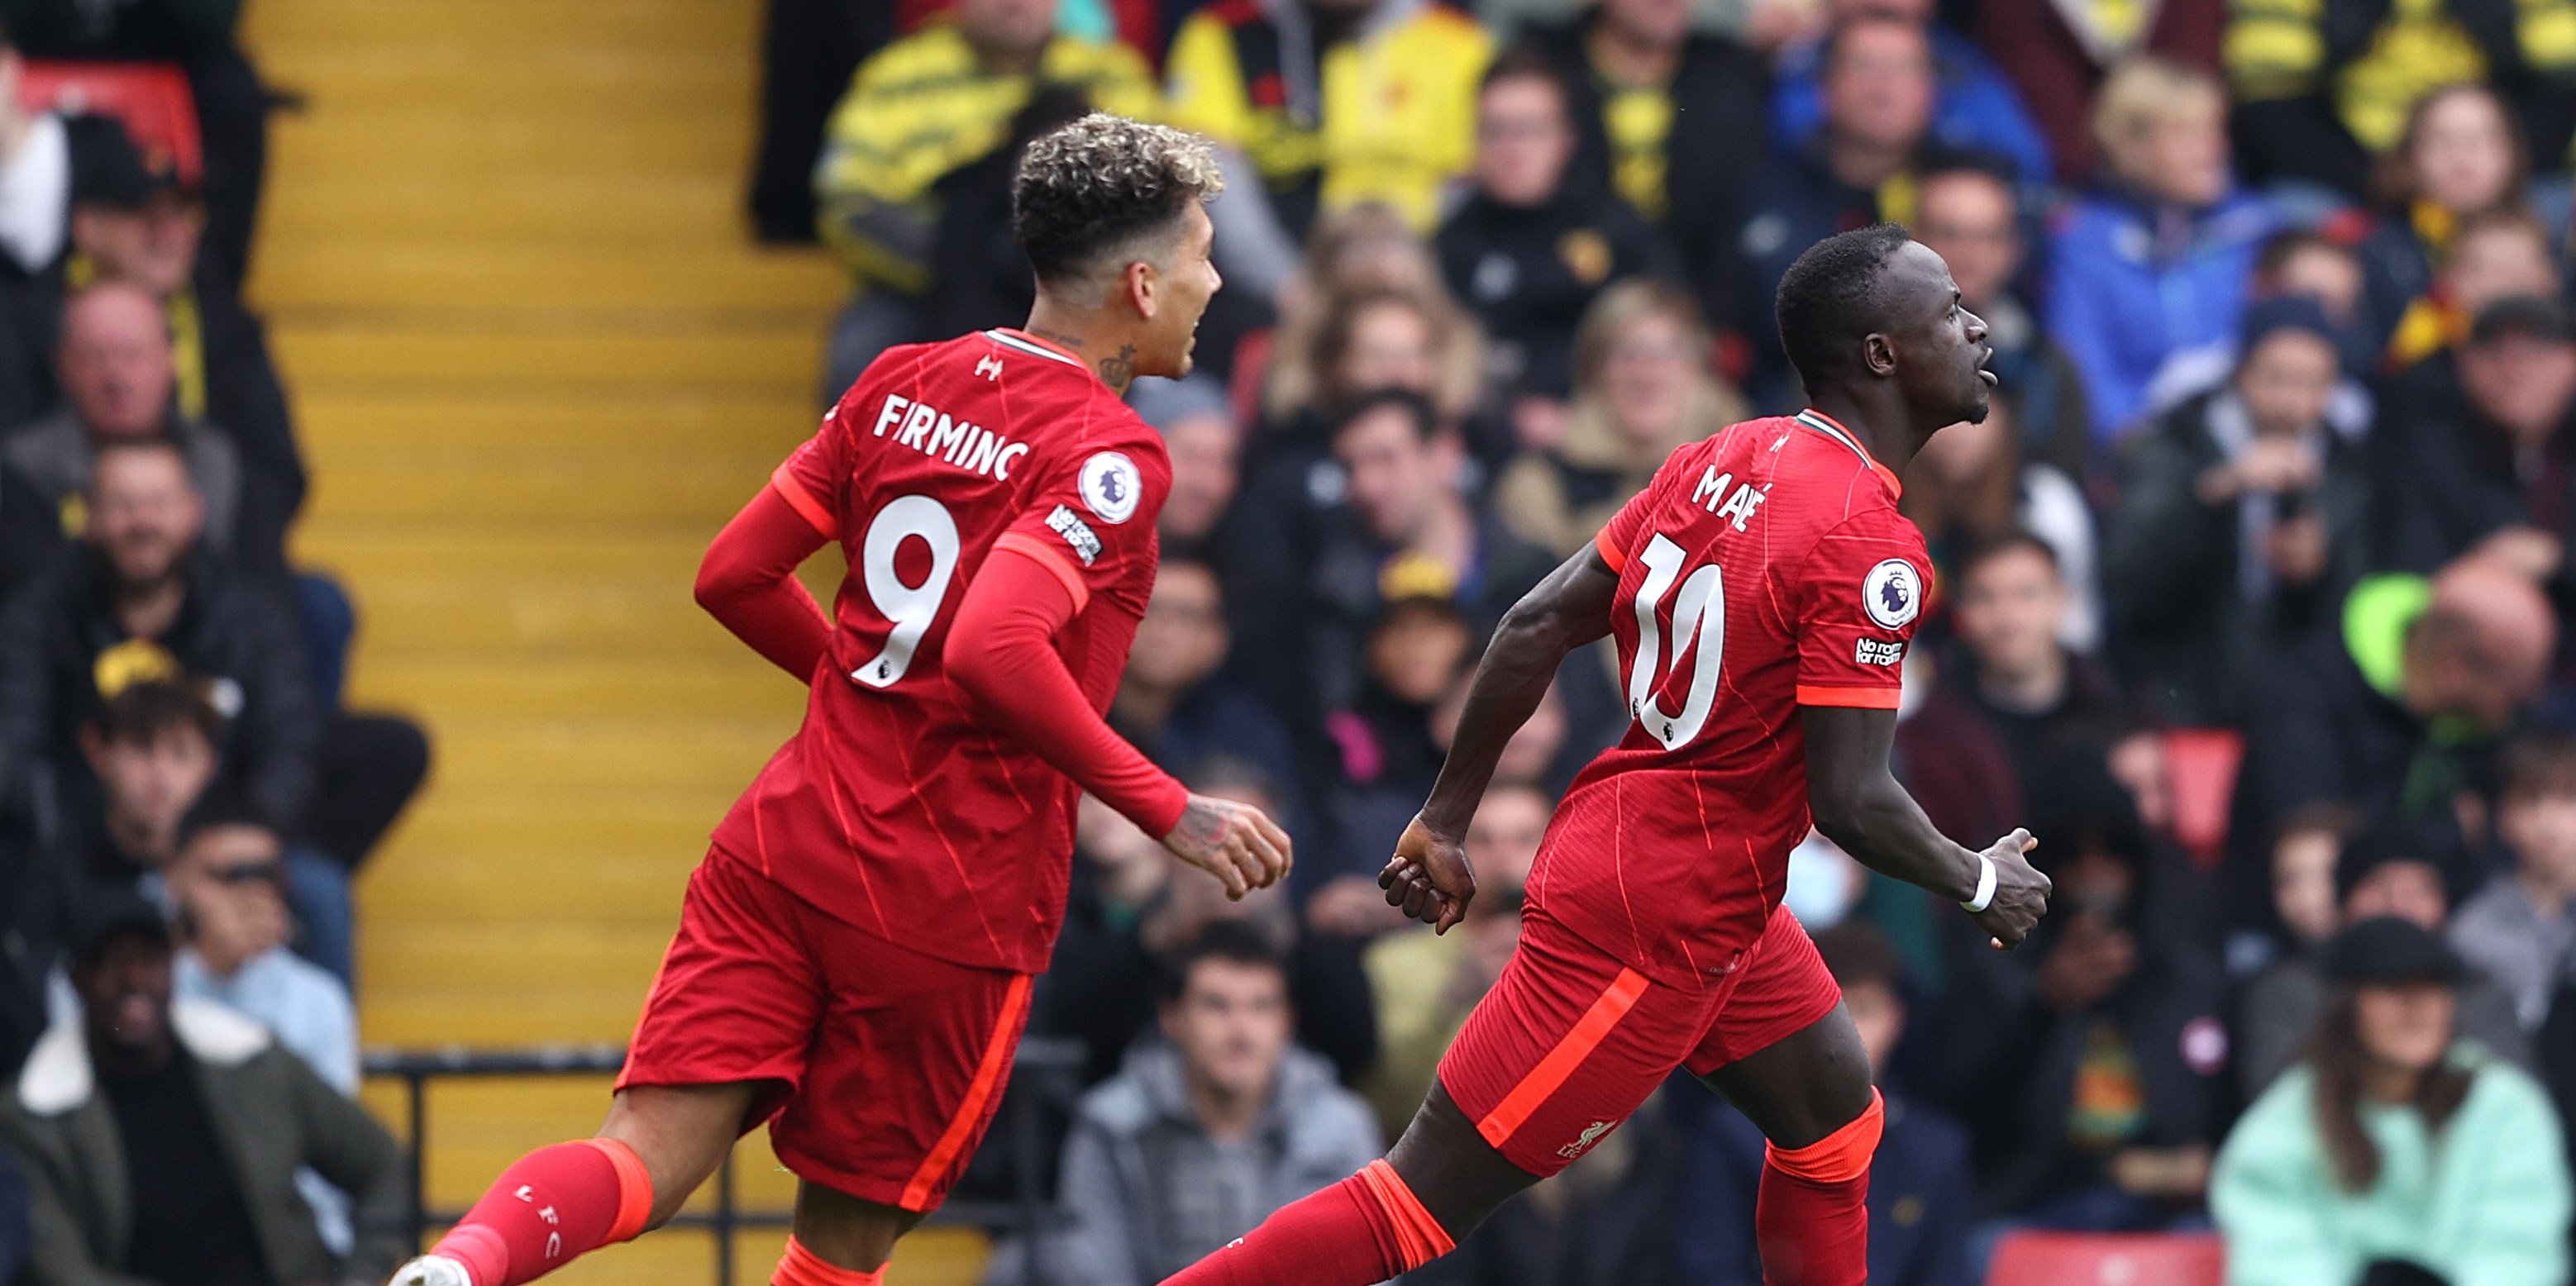 Barcelona move transfer sights from Origi to another Liverpool forward; could be viewed as potential Haaland alternative – El Nacional